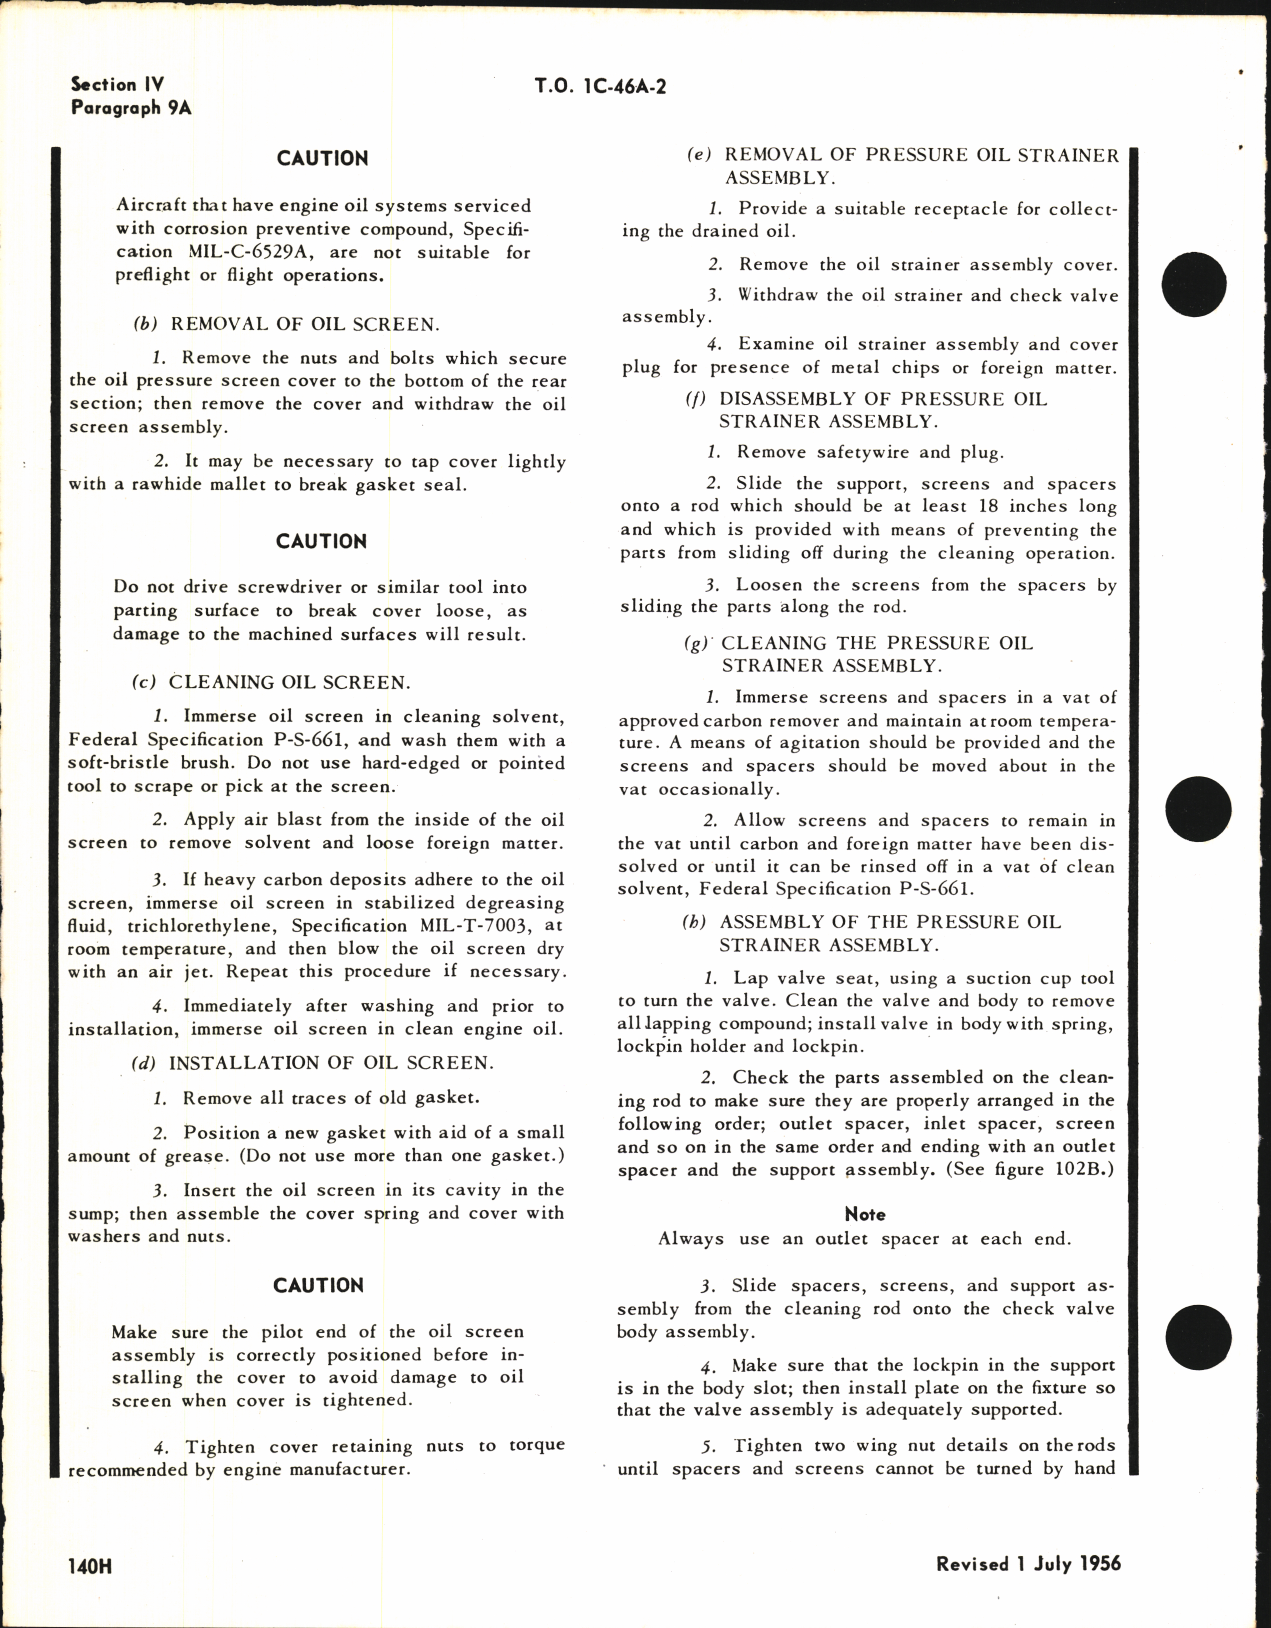 Sample page 8 from AirCorps Library document: Maintenance Instructions for C-46, ZC-46A, C-46D, C-46F, and R5C-1